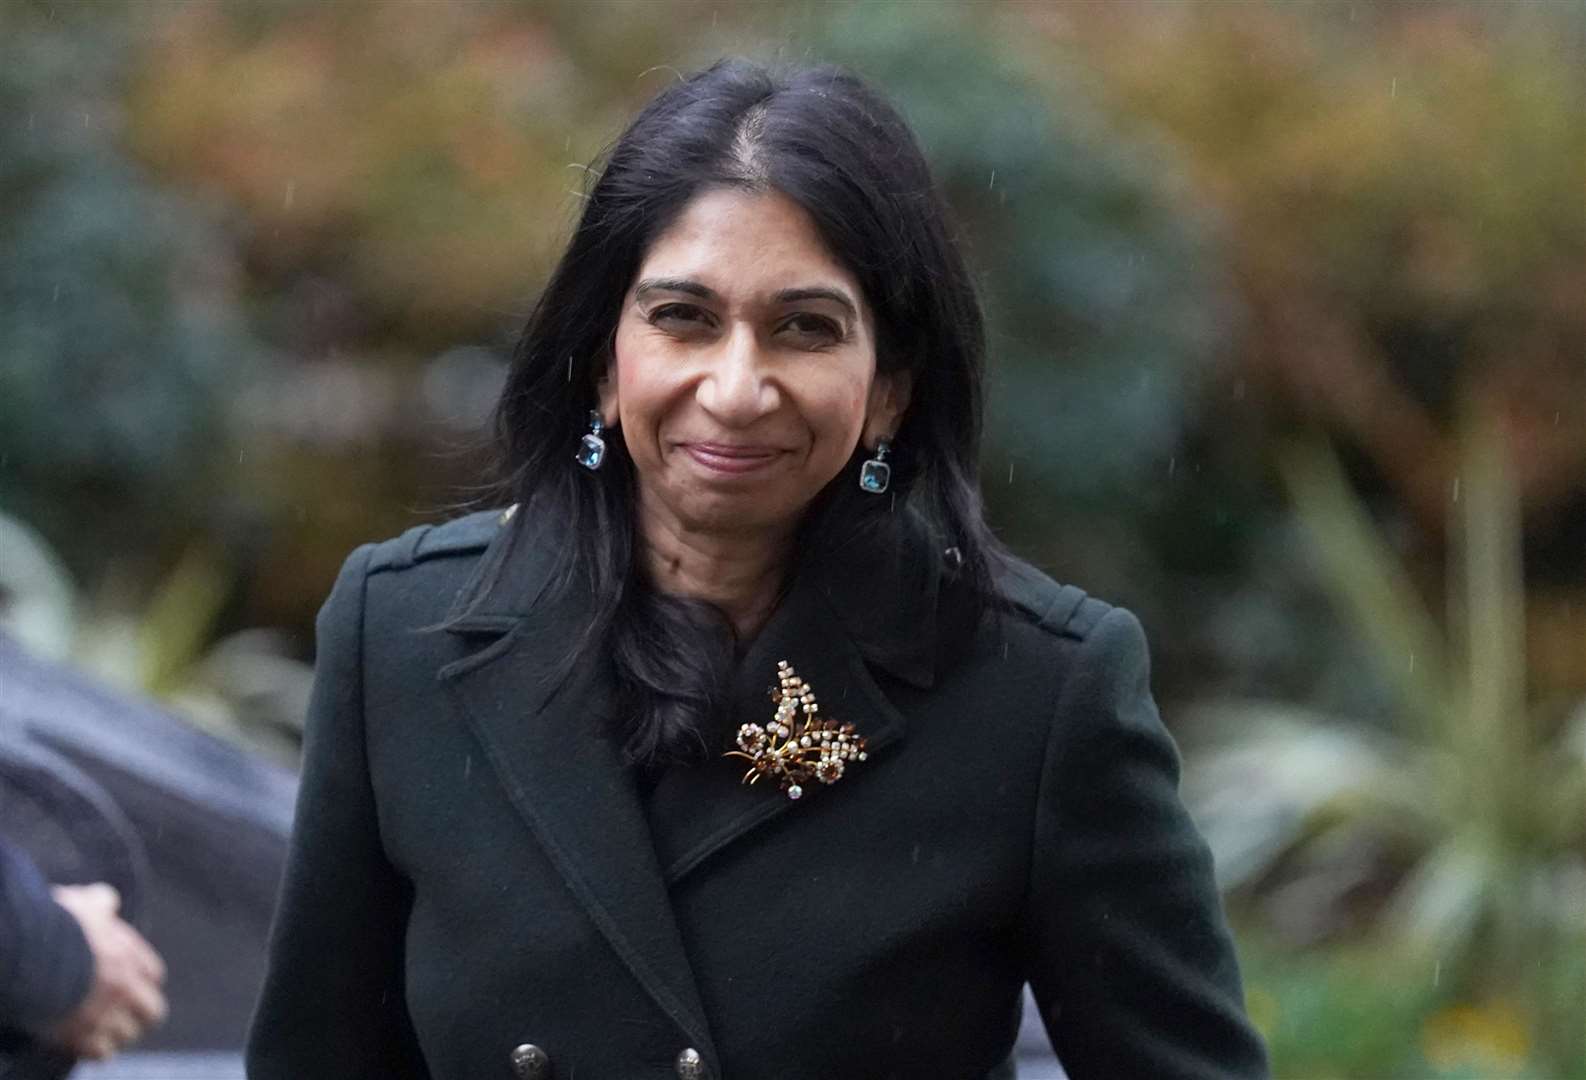 Suella Braverman and guests spent almost £114 a head at The Cinnamon Club restaurant in Westminster (Stefan Rousseau/PA)